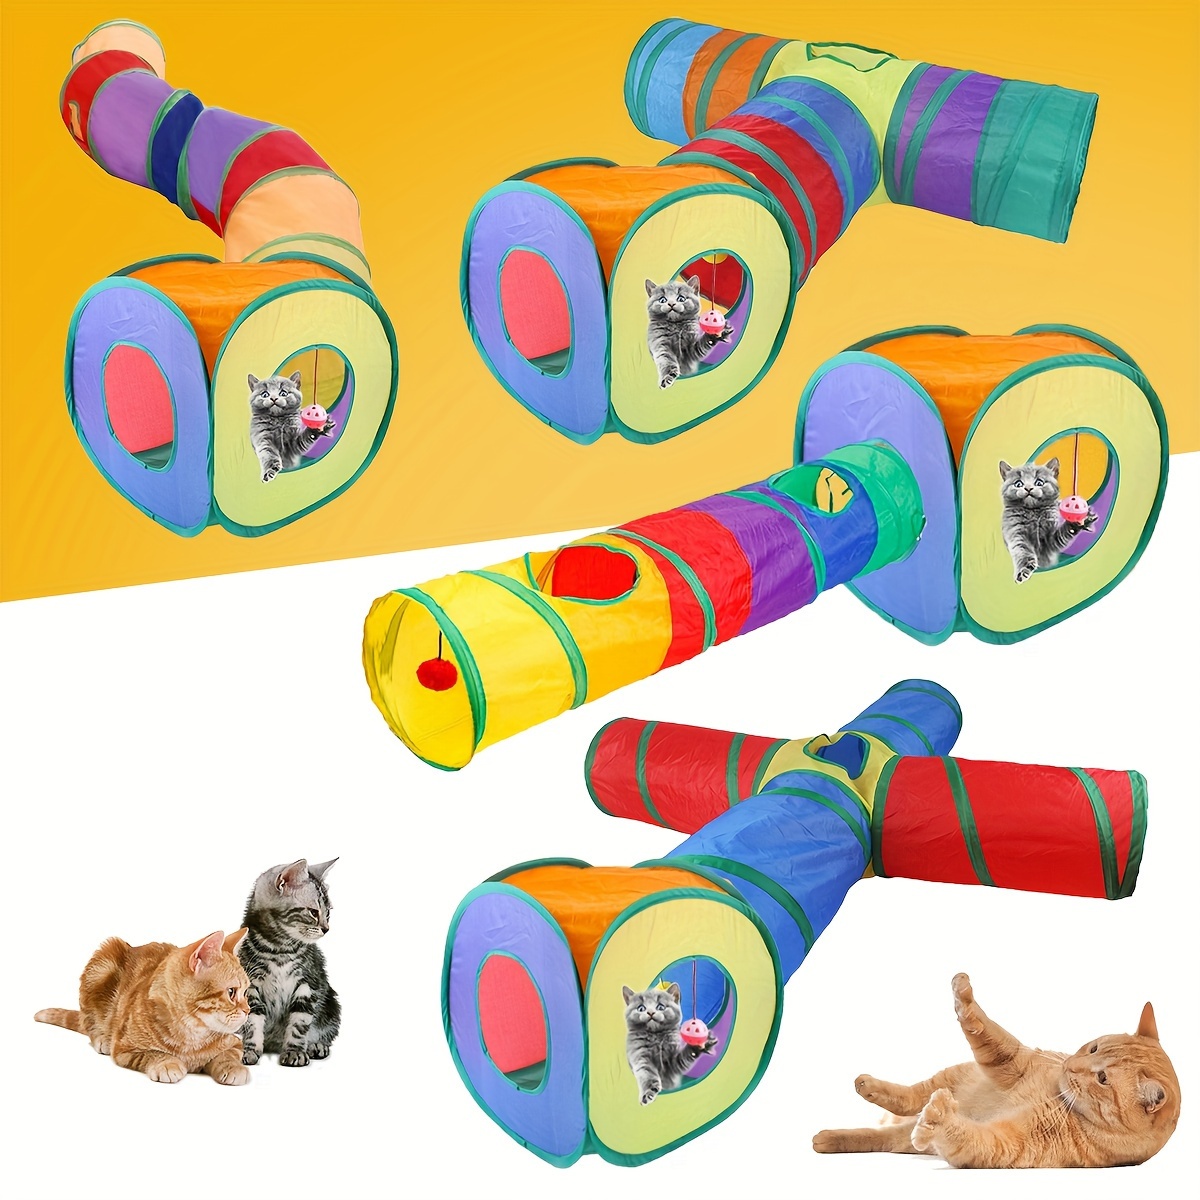 

3-way Collapsible Cat Tunnel Toy With Peek Hole, Interactive Play Tube For Cats, Kittens - Rainbow Patterned, Polyester Material, Multi-cat Play Tunnel Set - 2pc Set